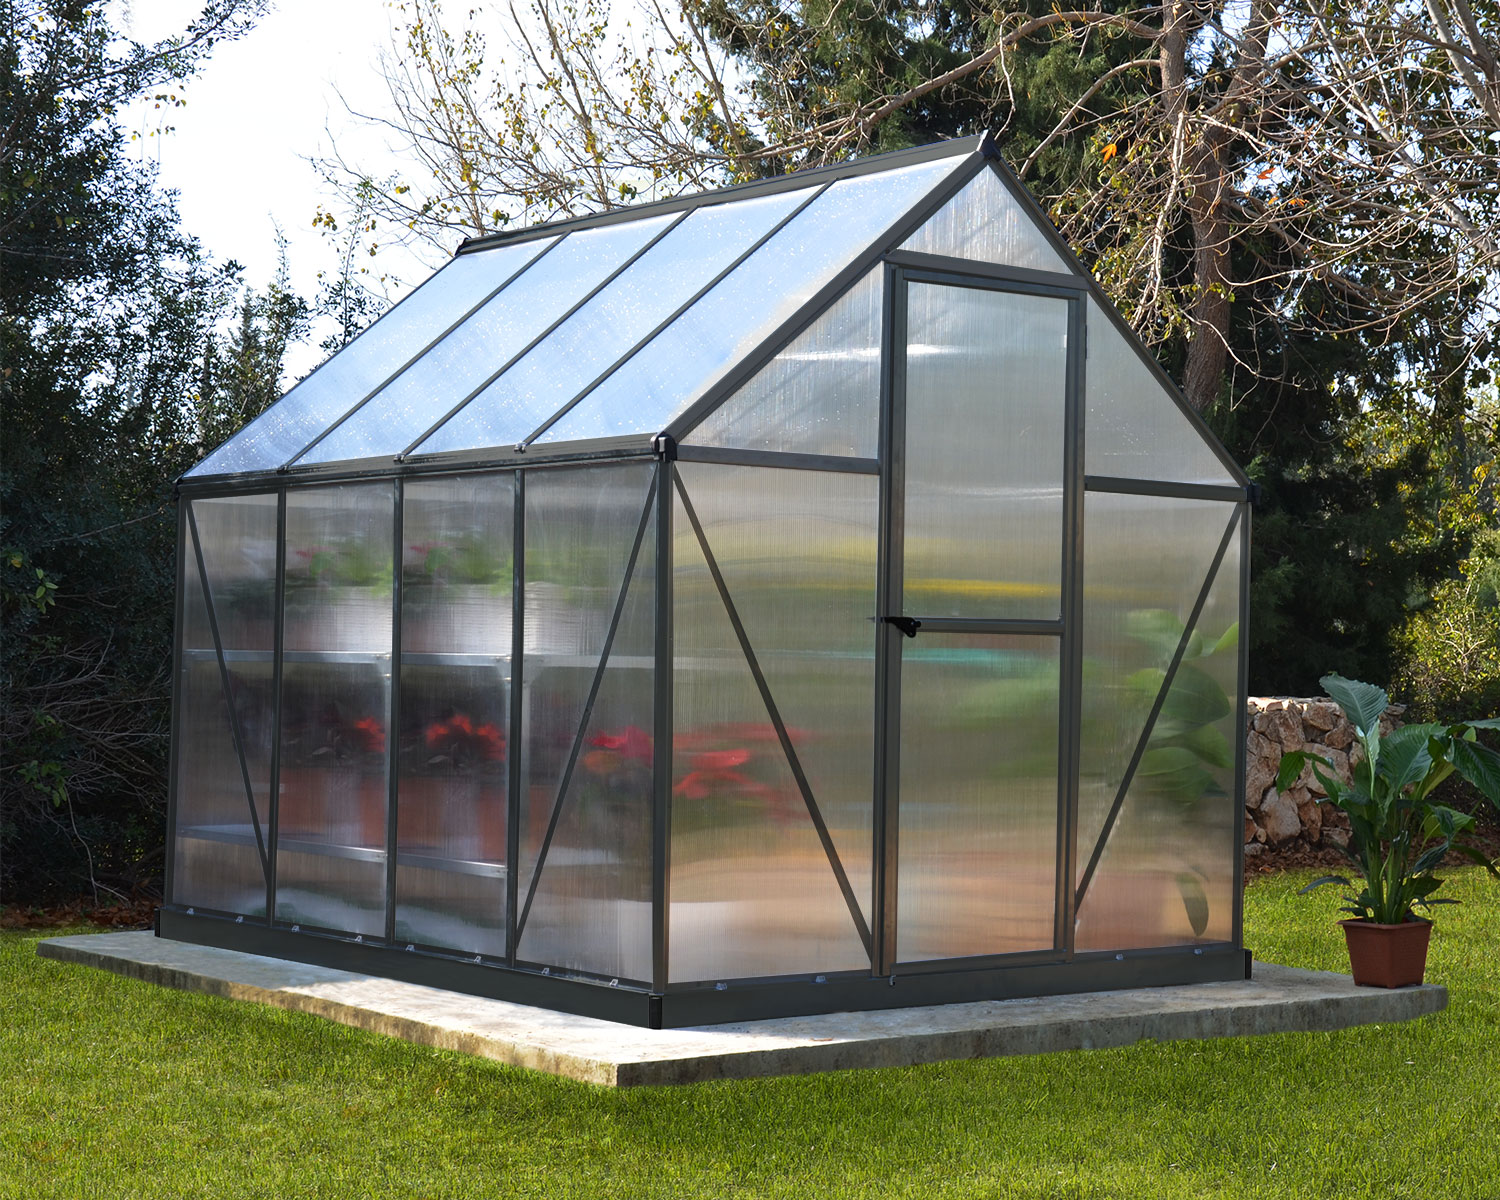 Mythos 6' x 8' Greenhouse Grey Structure & Twinwall Panels outside on a lawn